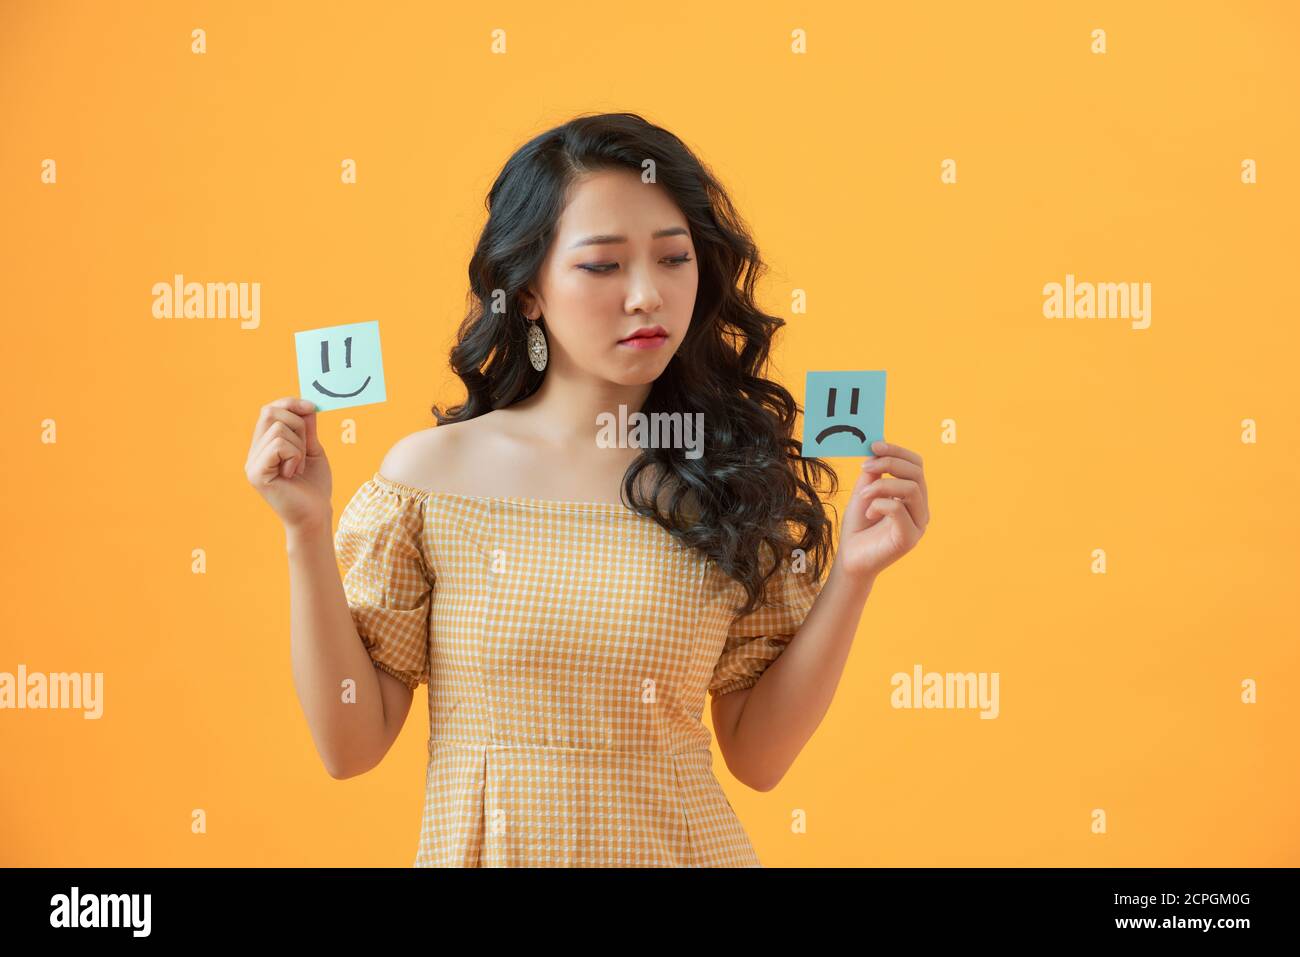 Photo of gloomy lady holding paper emoticons good and bad mood prefer negative emotions awful day Stock Photo